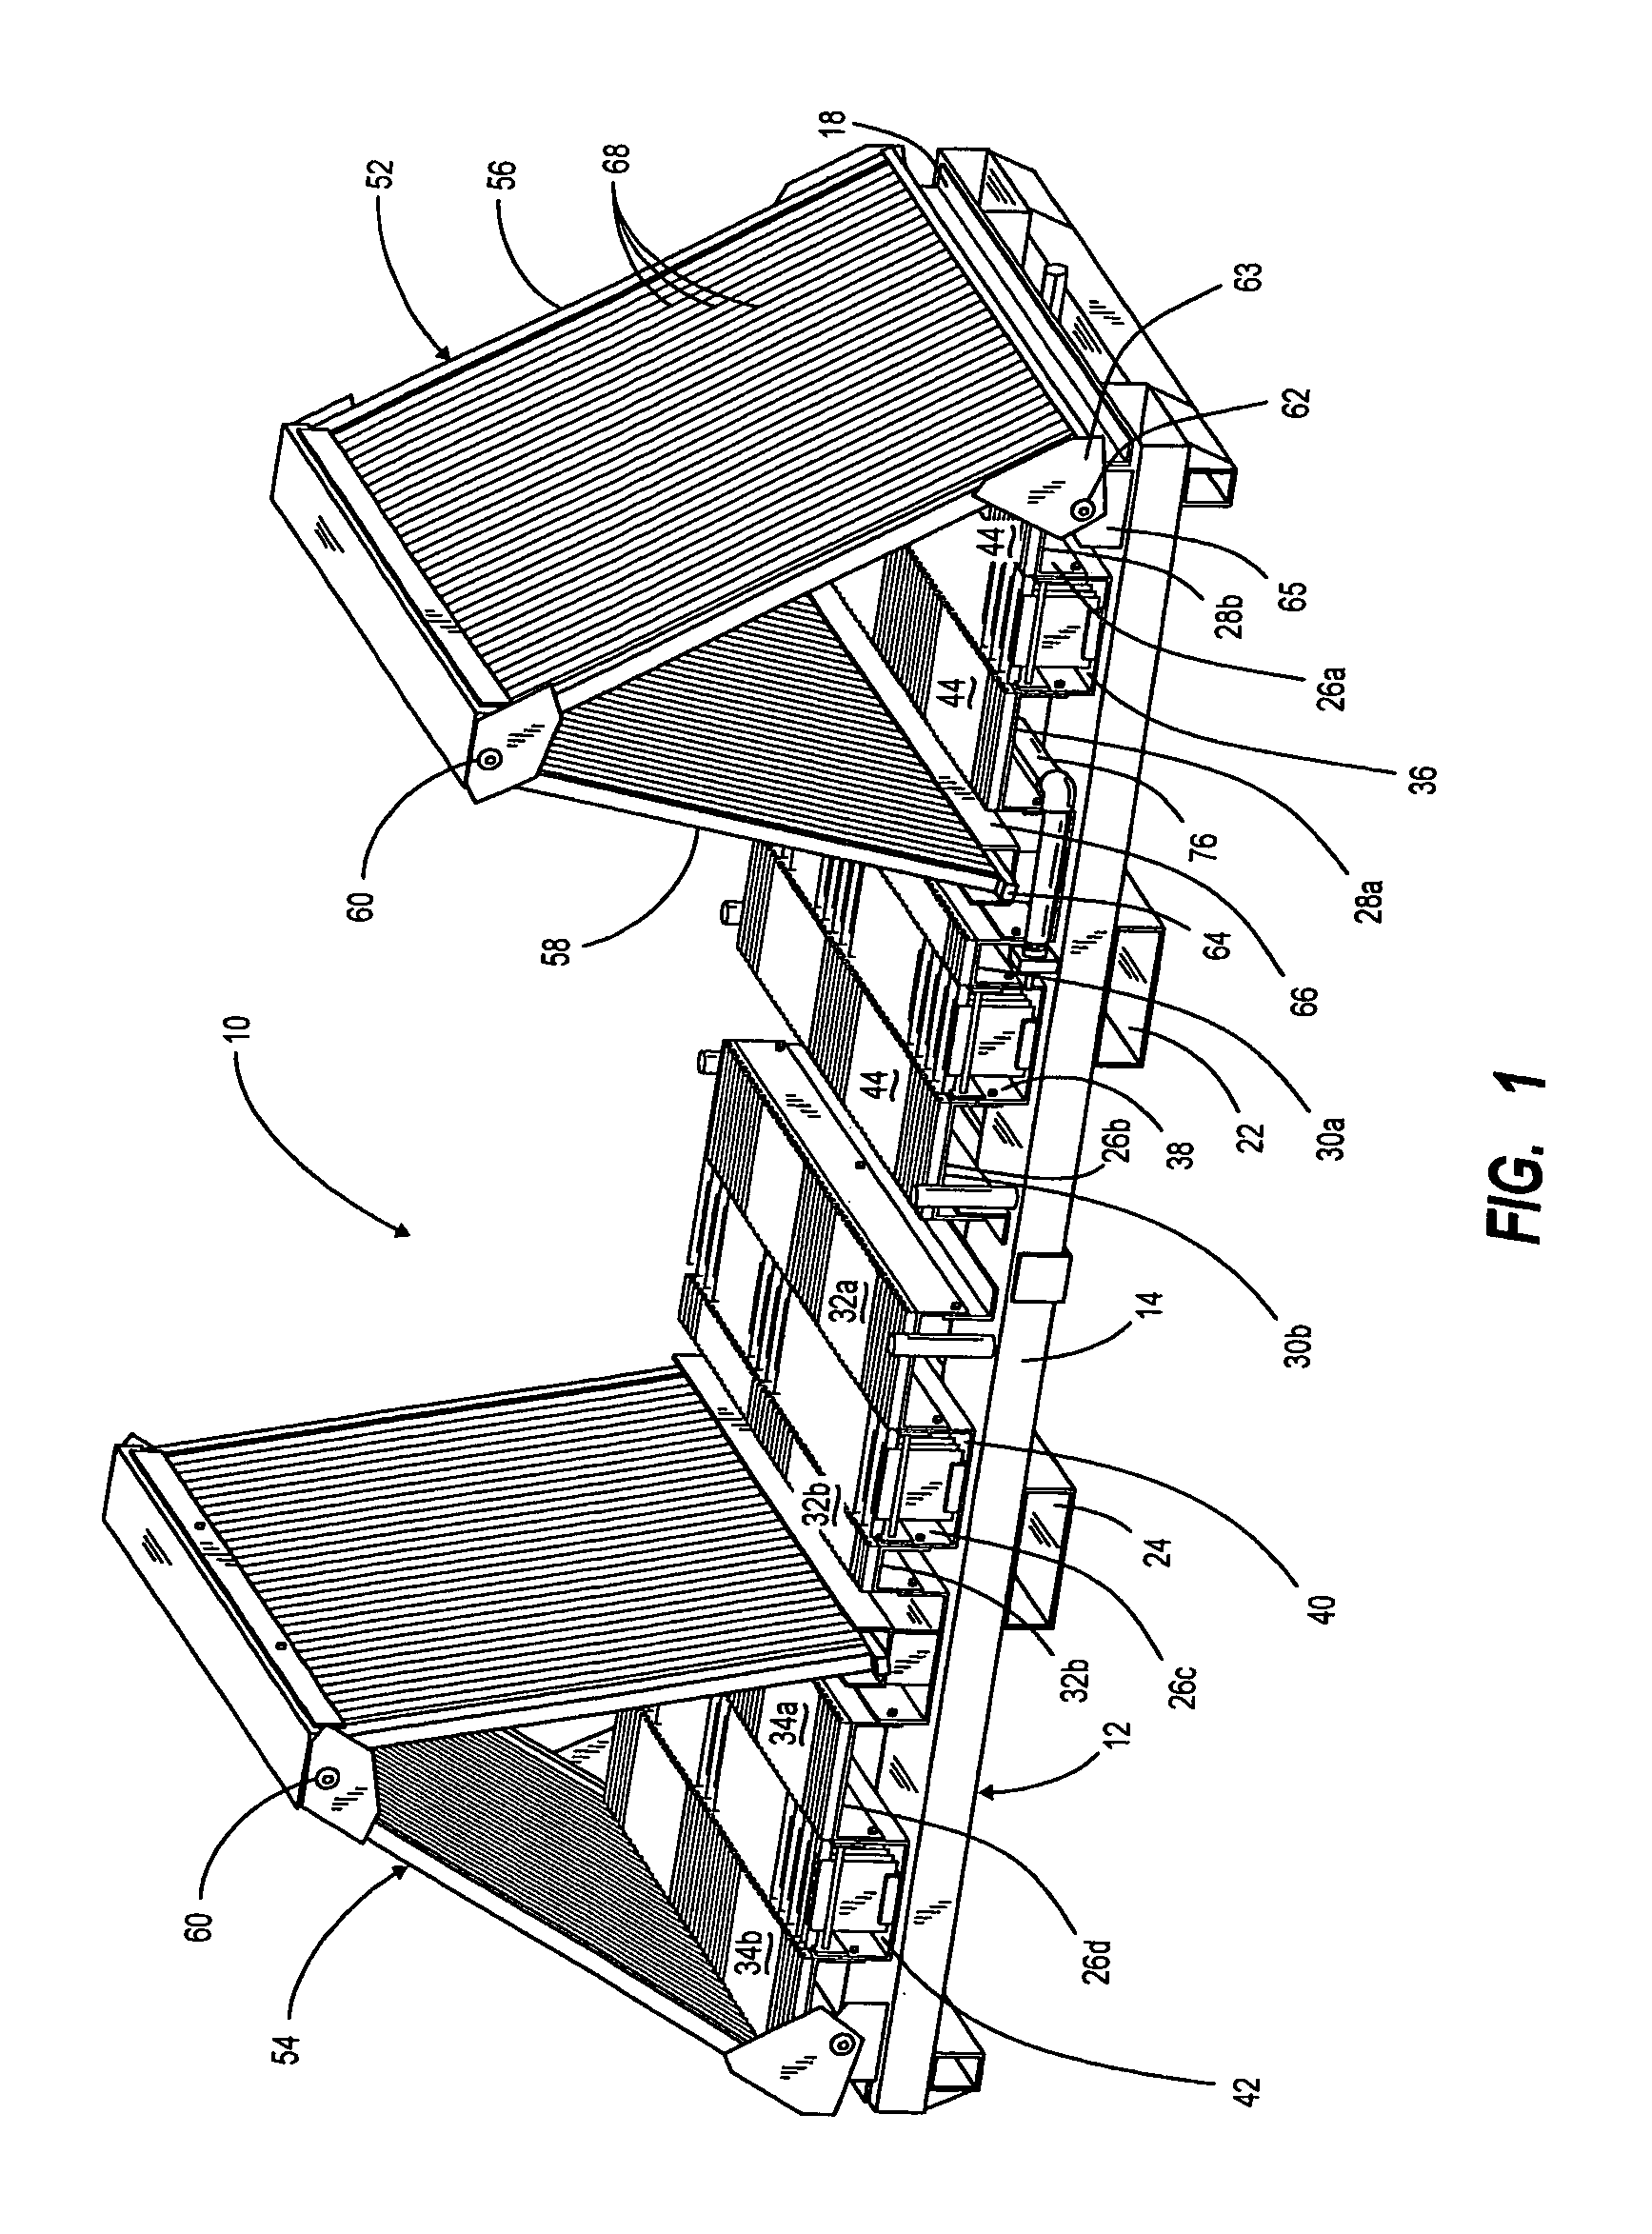 Rack for holding plate glass and other planar articles